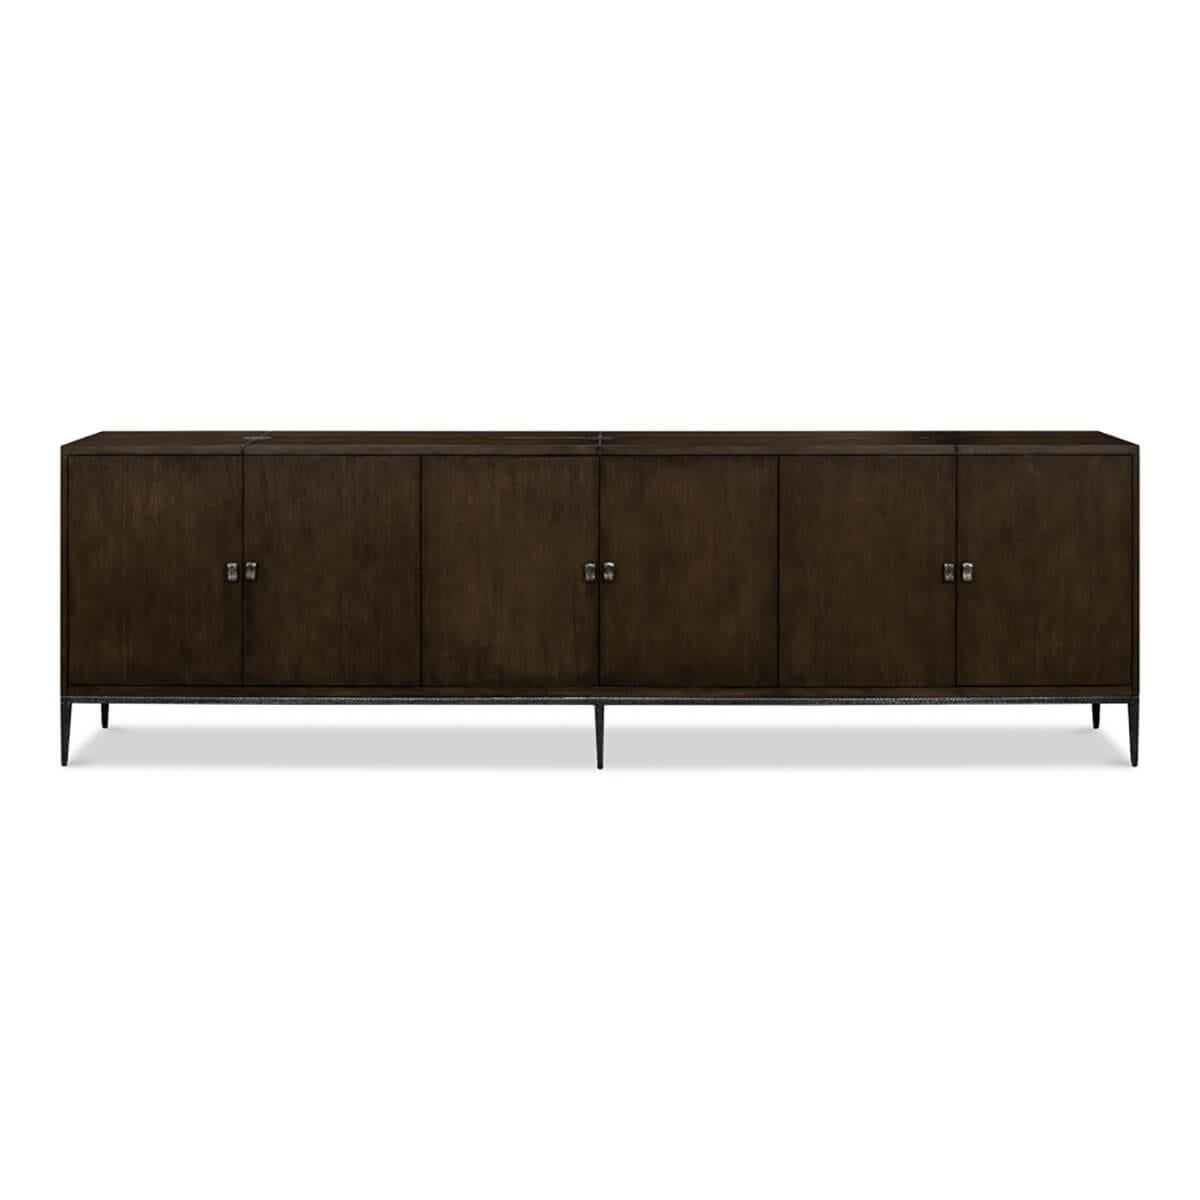 A symbol of minimalist elegance. Precision-crafted, this exquisite piece boasts Oak veneers in a dark artisan finish, complemented by textured iron inlays in both circular and linear designs.

This credenza's proportions are meticulously designed